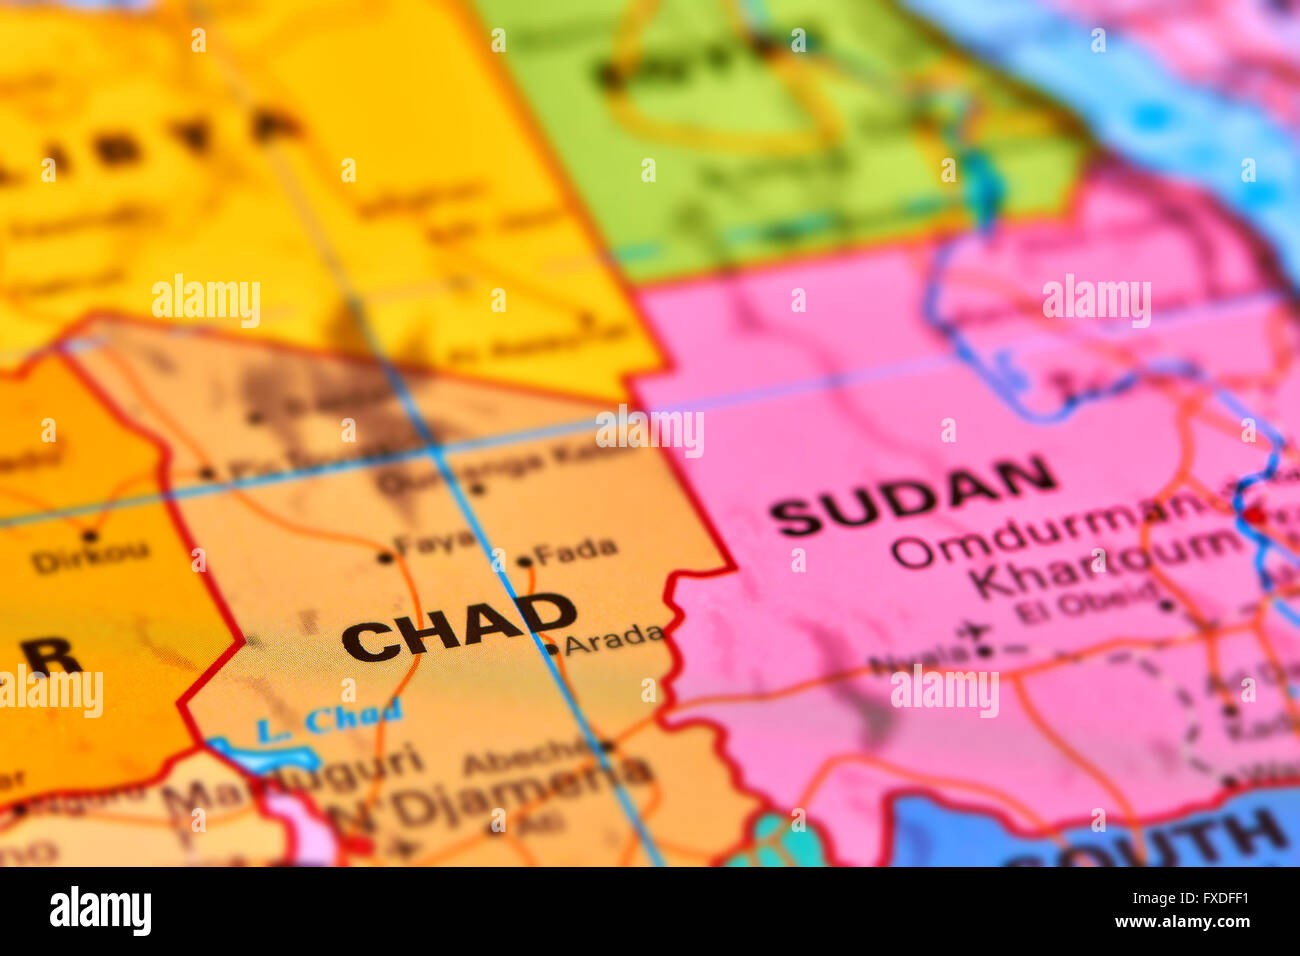 Chad Country in Africa on the World Map Stock Photo